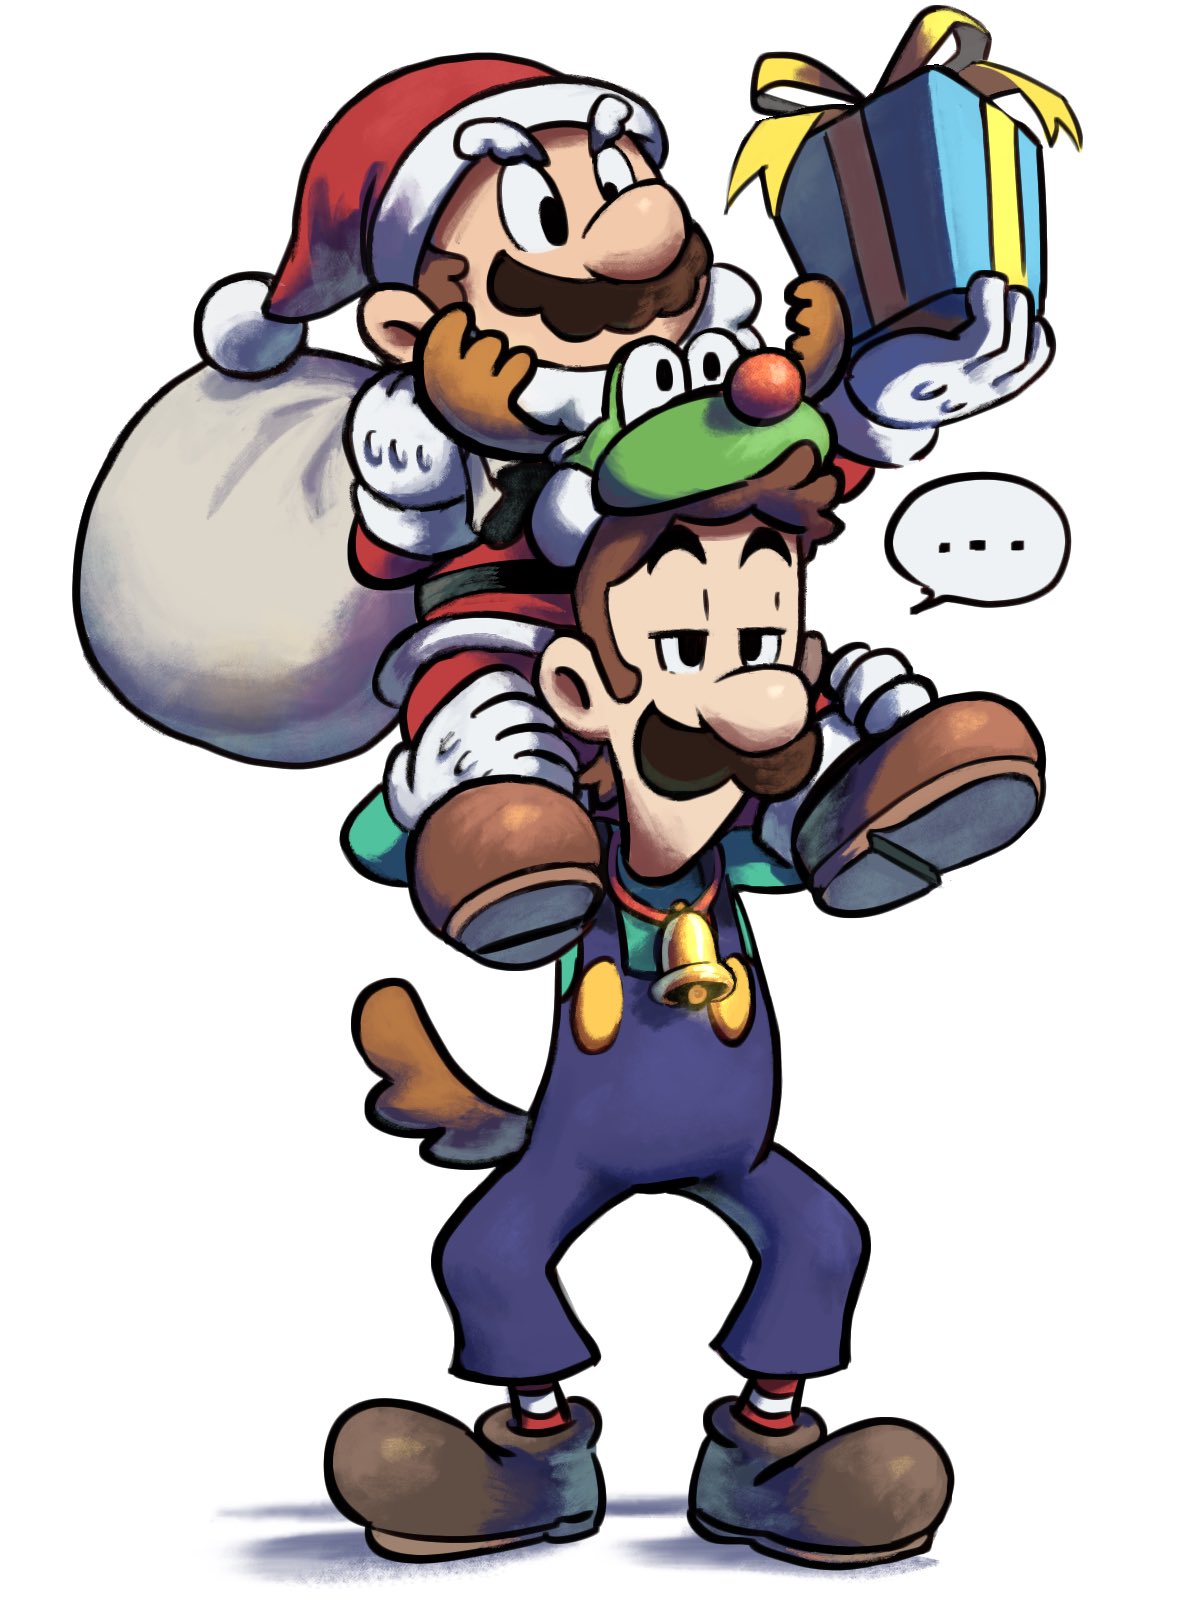 ... 2boys alternate_costume antlers blue_overalls boots brothers brown_footwear brown_hair brown_tail carrying christmas deer_antlers deer_tail facial_hair fake_tail full_body gift gloves green_shirt hat highres holding holding_gift holding_sack jacket luigi mario mario_&amp;_luigi_rpg masanori_sato_(style) multiple_boys mustache overalls pants piggyback red_jacket red_pants red_socks sack santa_hat shirt short_hair siblings simple_background socks speech_bubble striped striped_socks super_mario_bros. tail uninterested white_background white_gloves white_socks ya_mari_6363